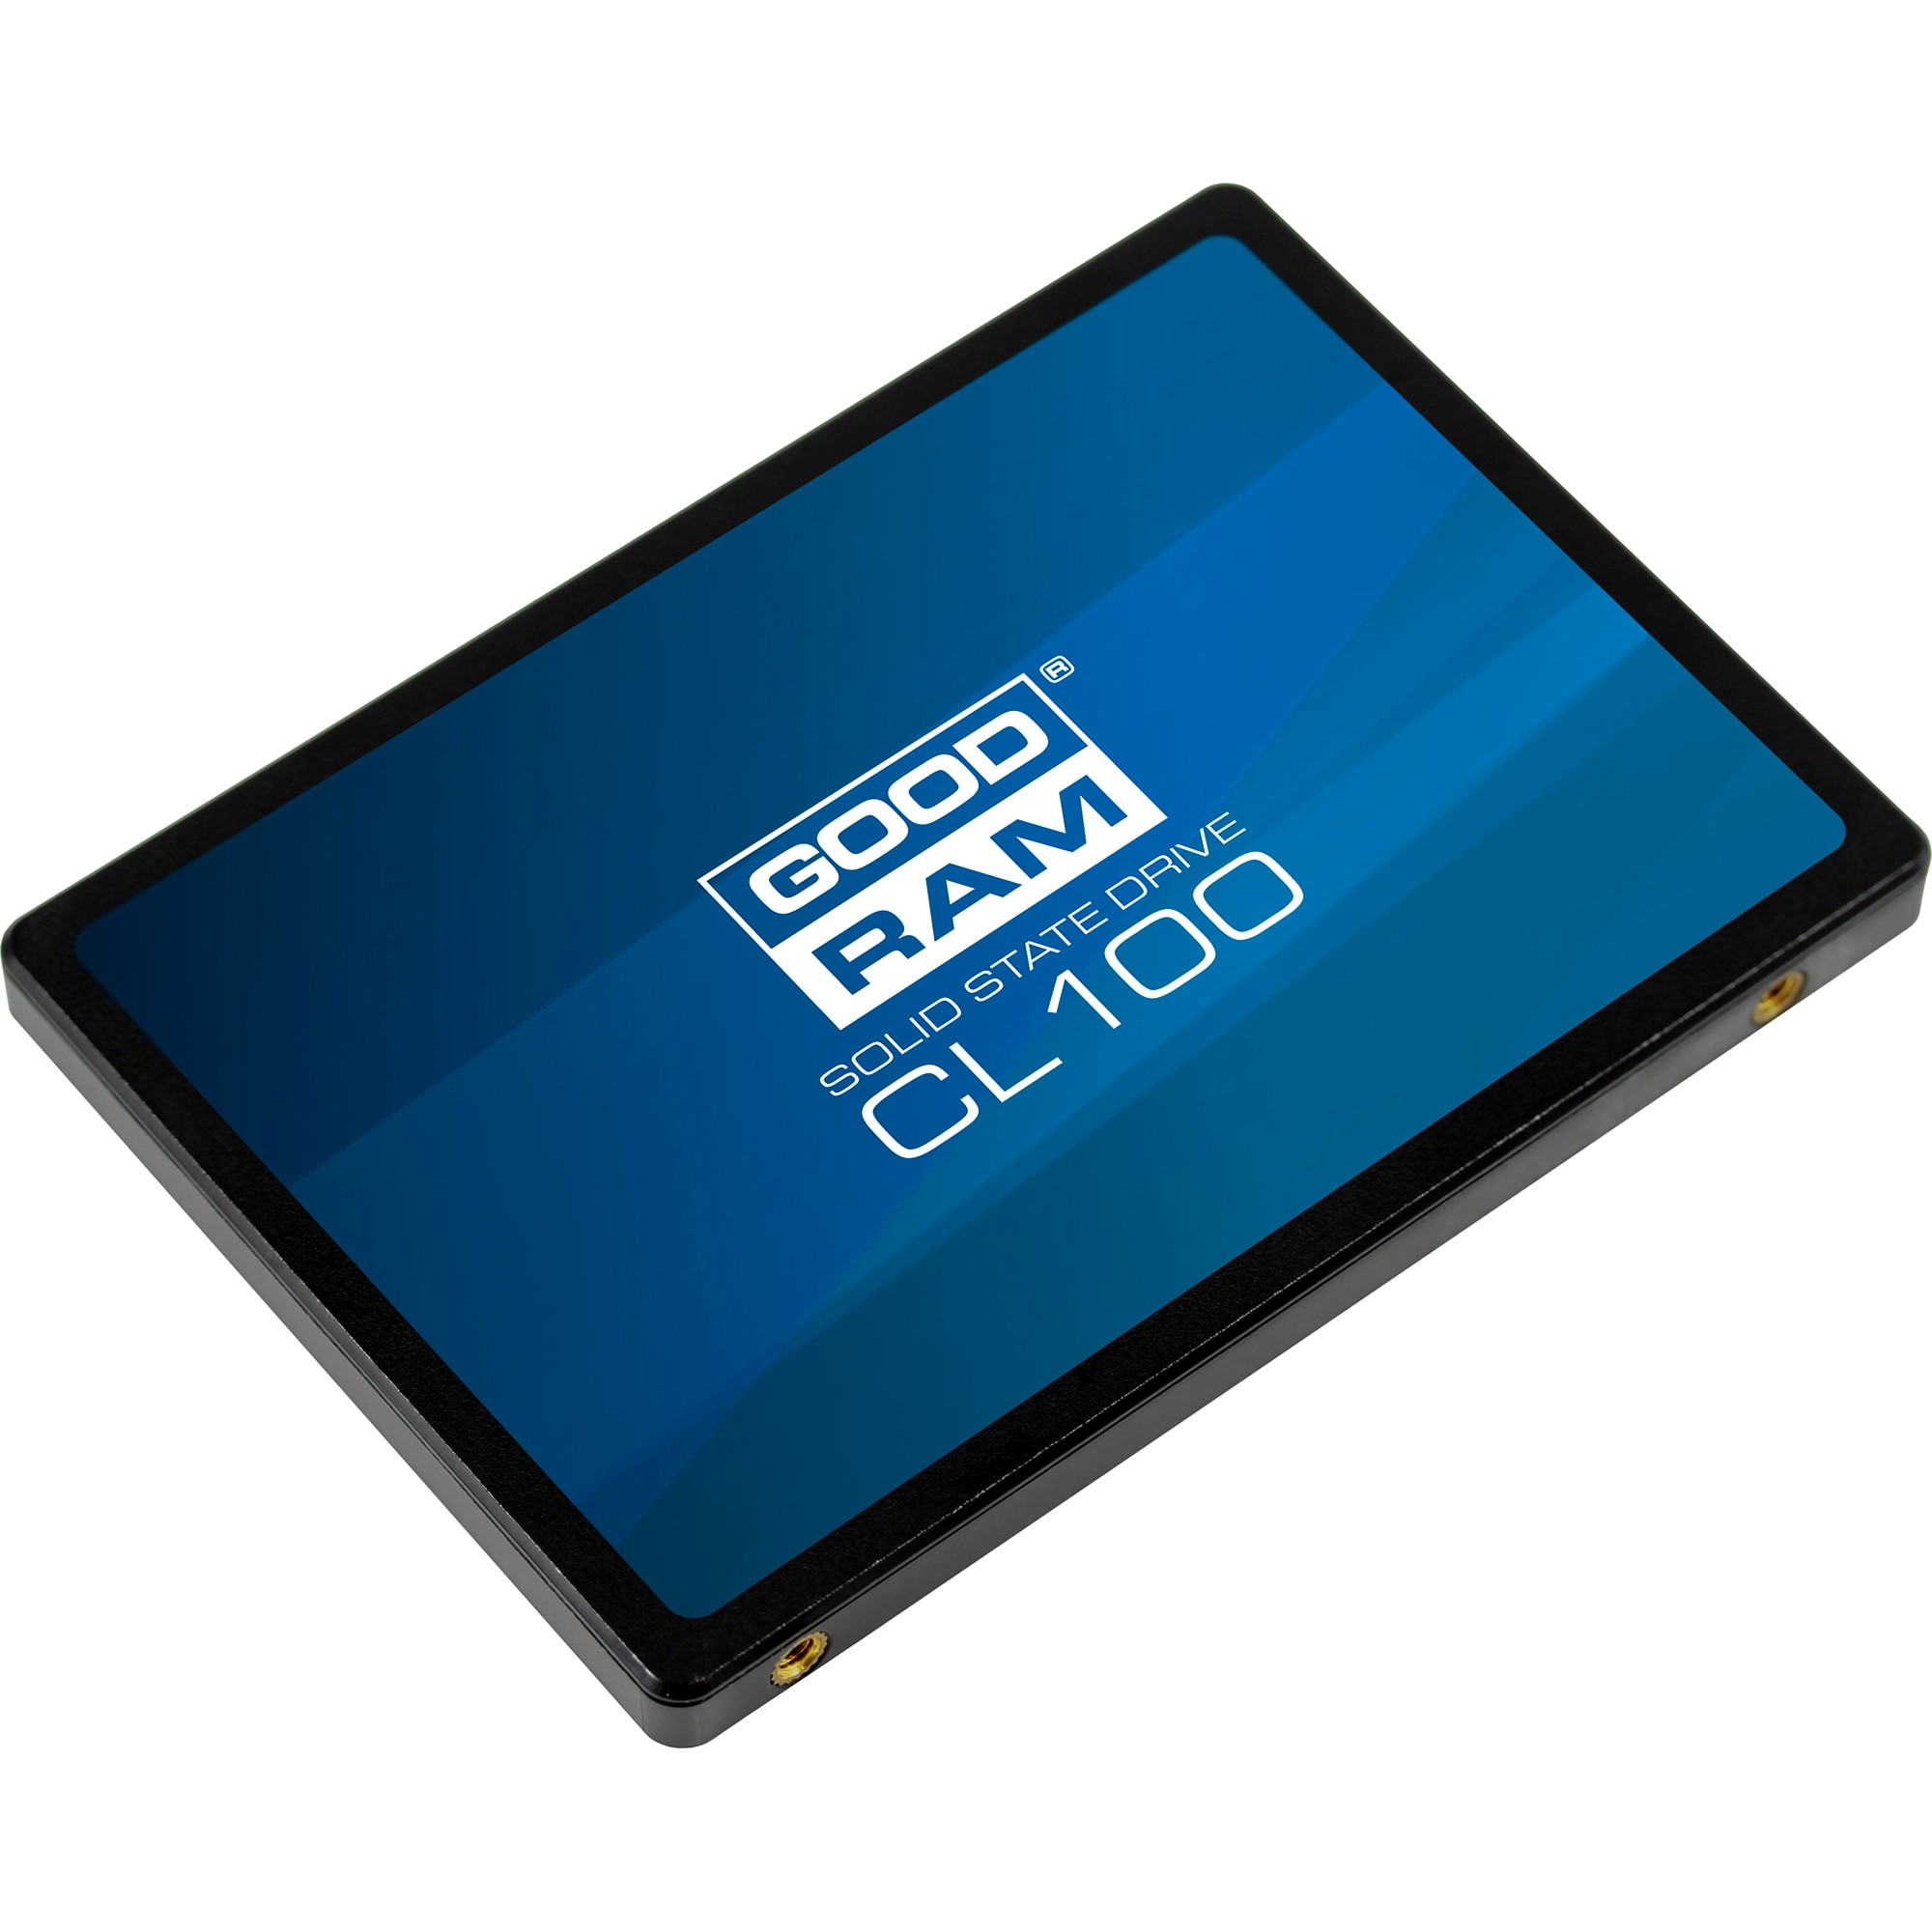 cleaner nice to meet you bribe Solid-State Drive (SSD) GOODRAM CL100, 240GB, SATA III - eMAG.ro